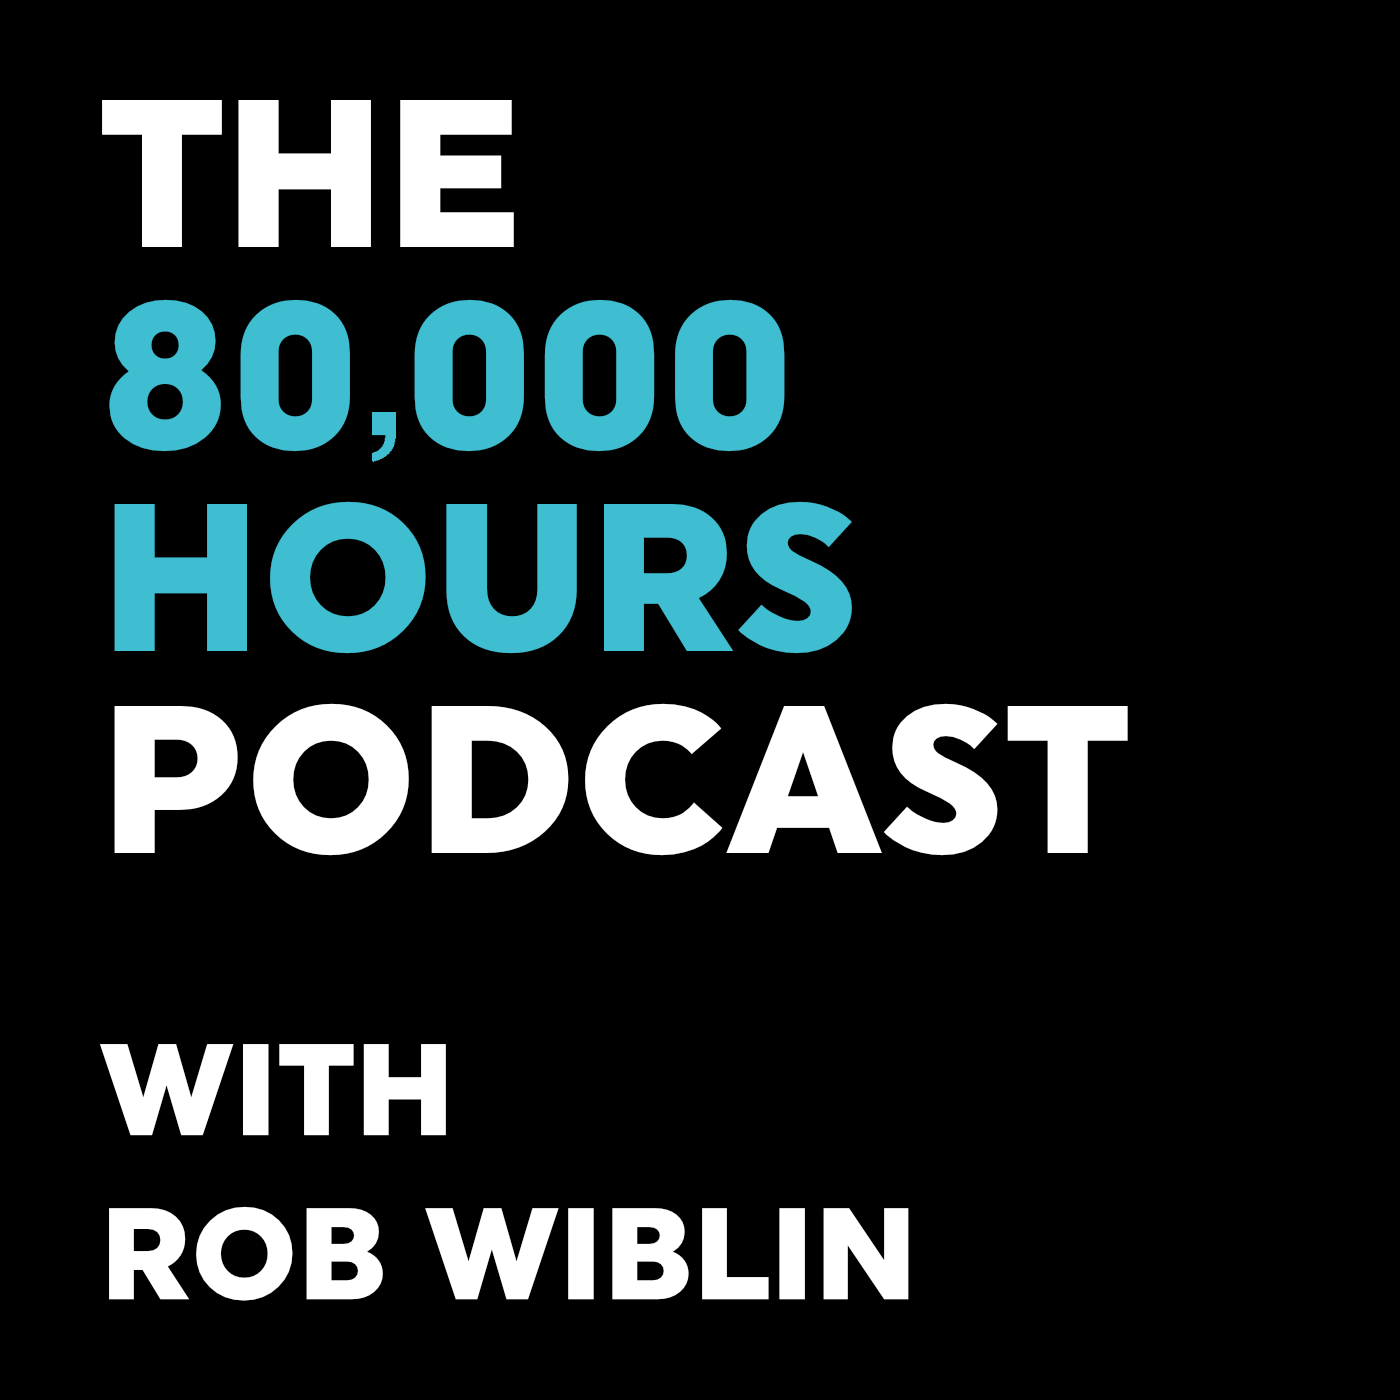 The 80,000 Hours Podcast with Rob Wiblin